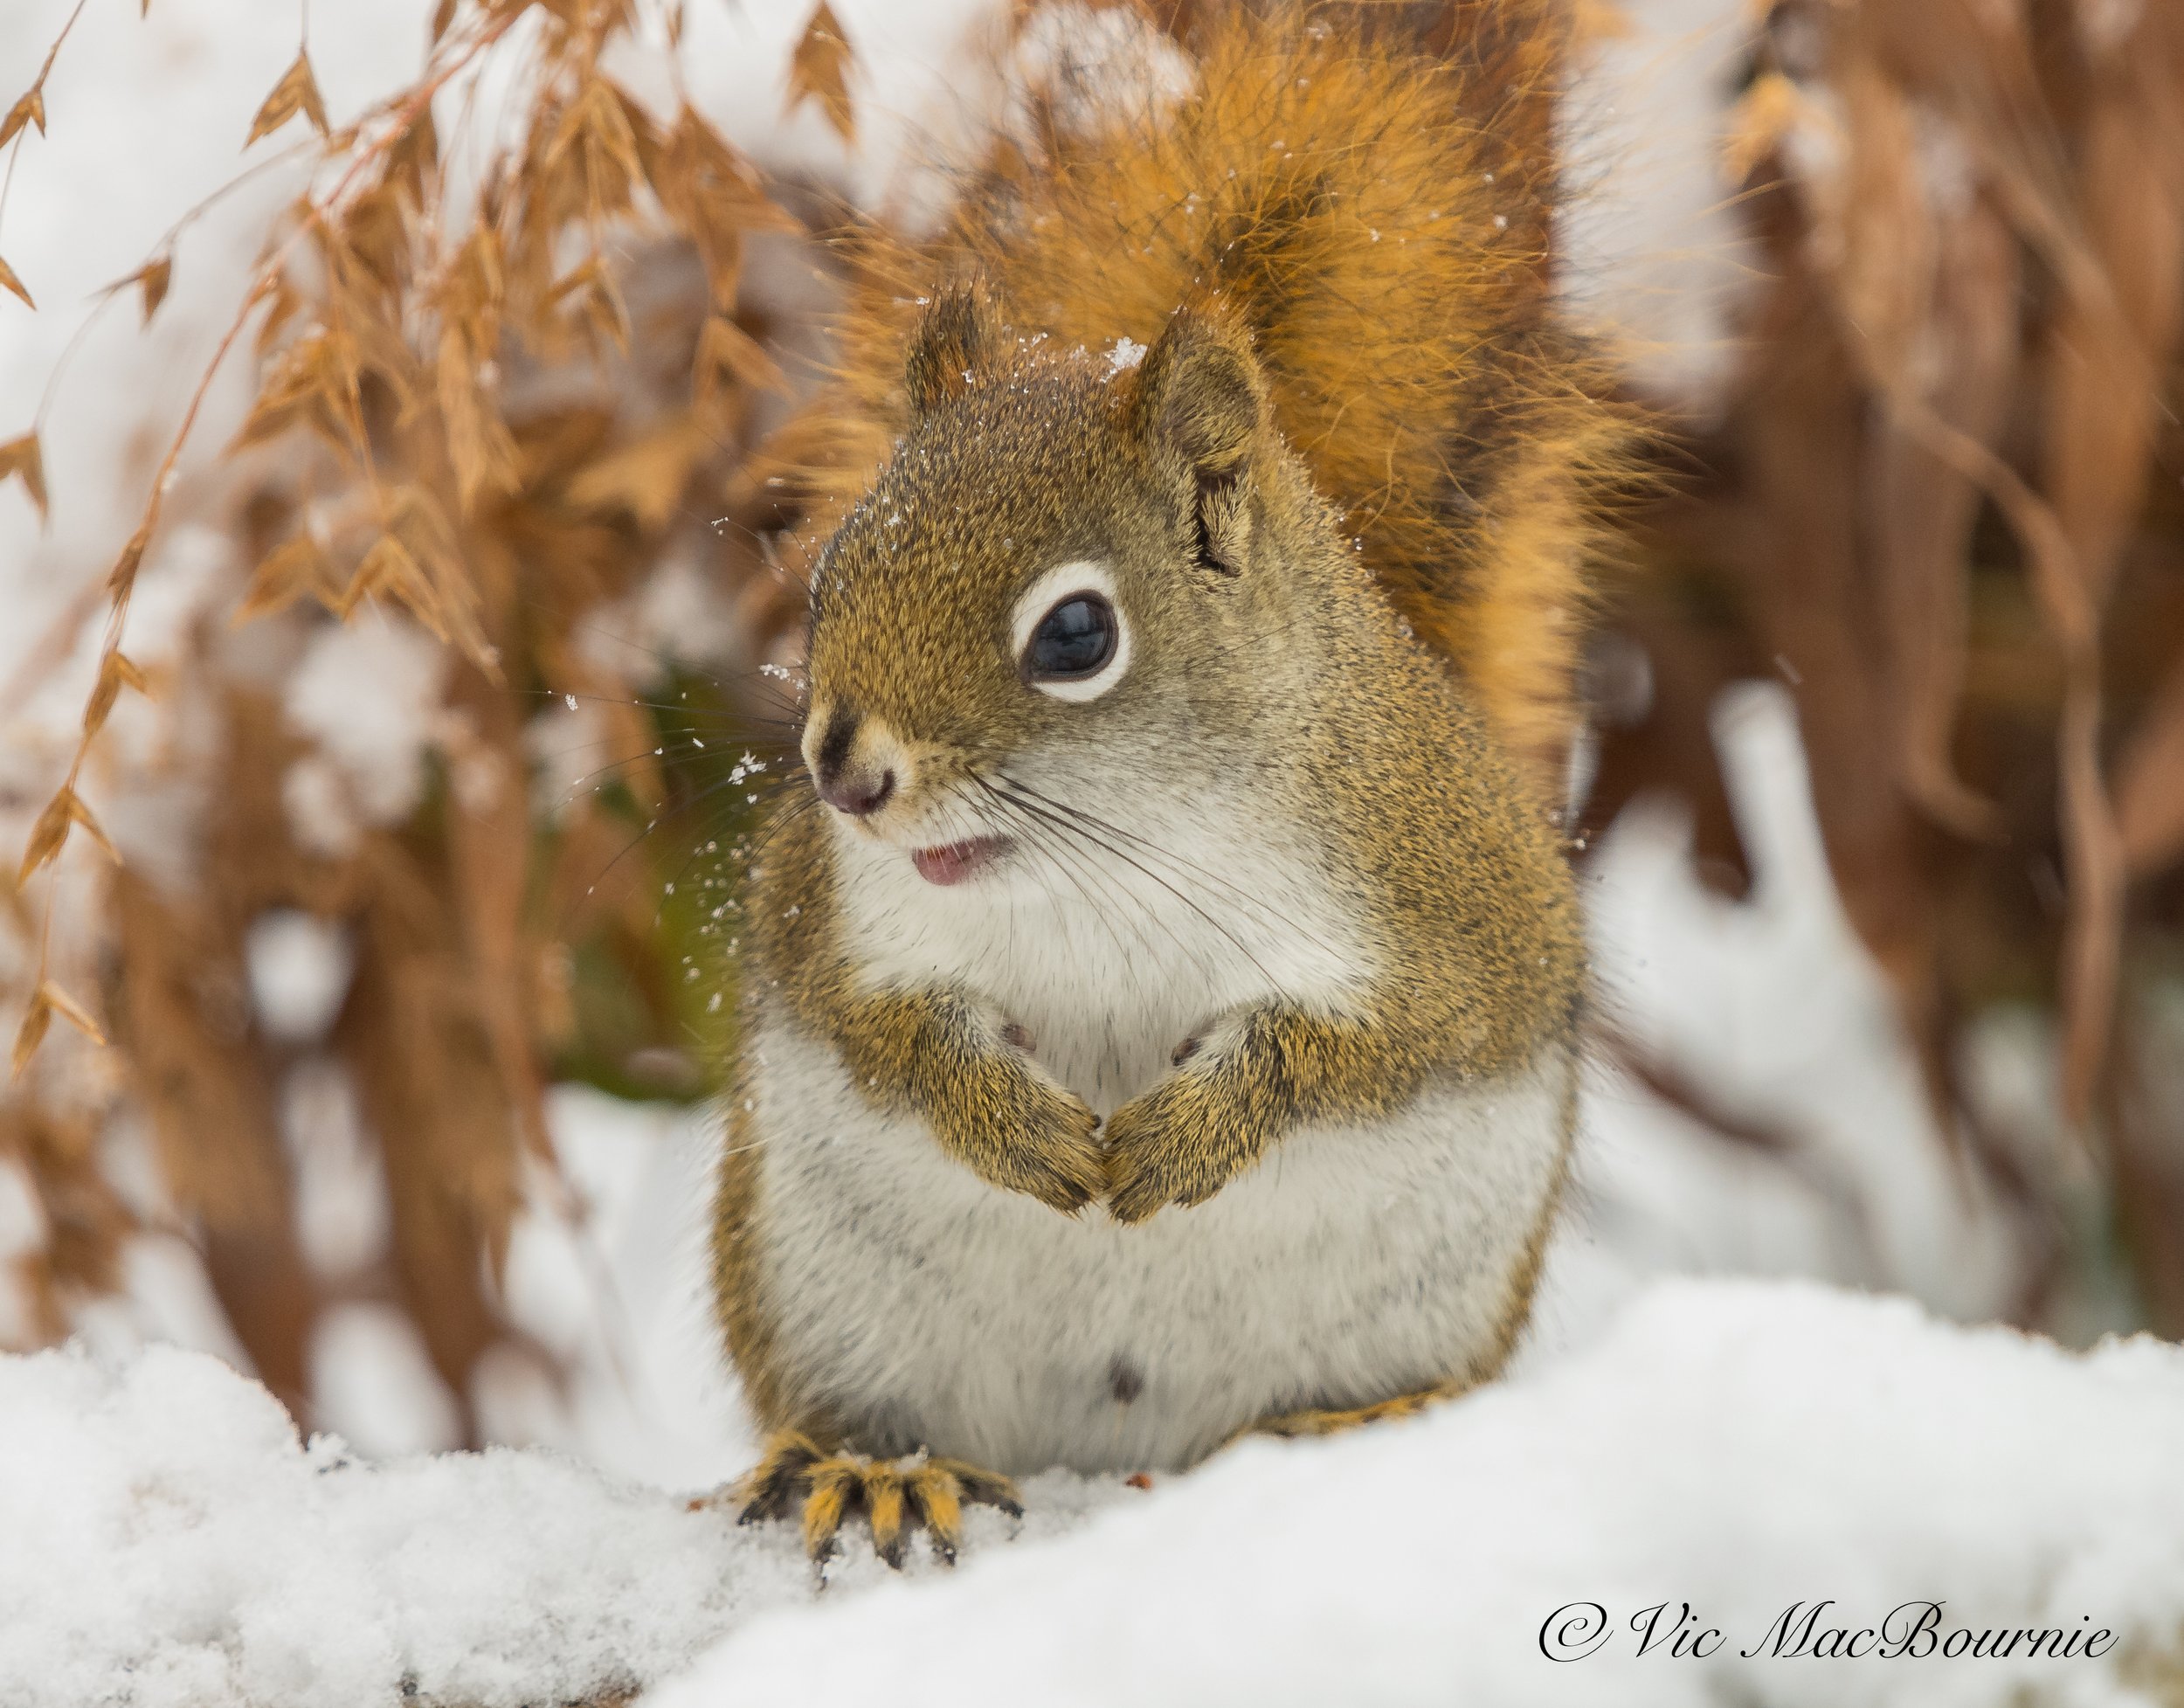 Red Squirrel among the Northern Sea Oats in winter.